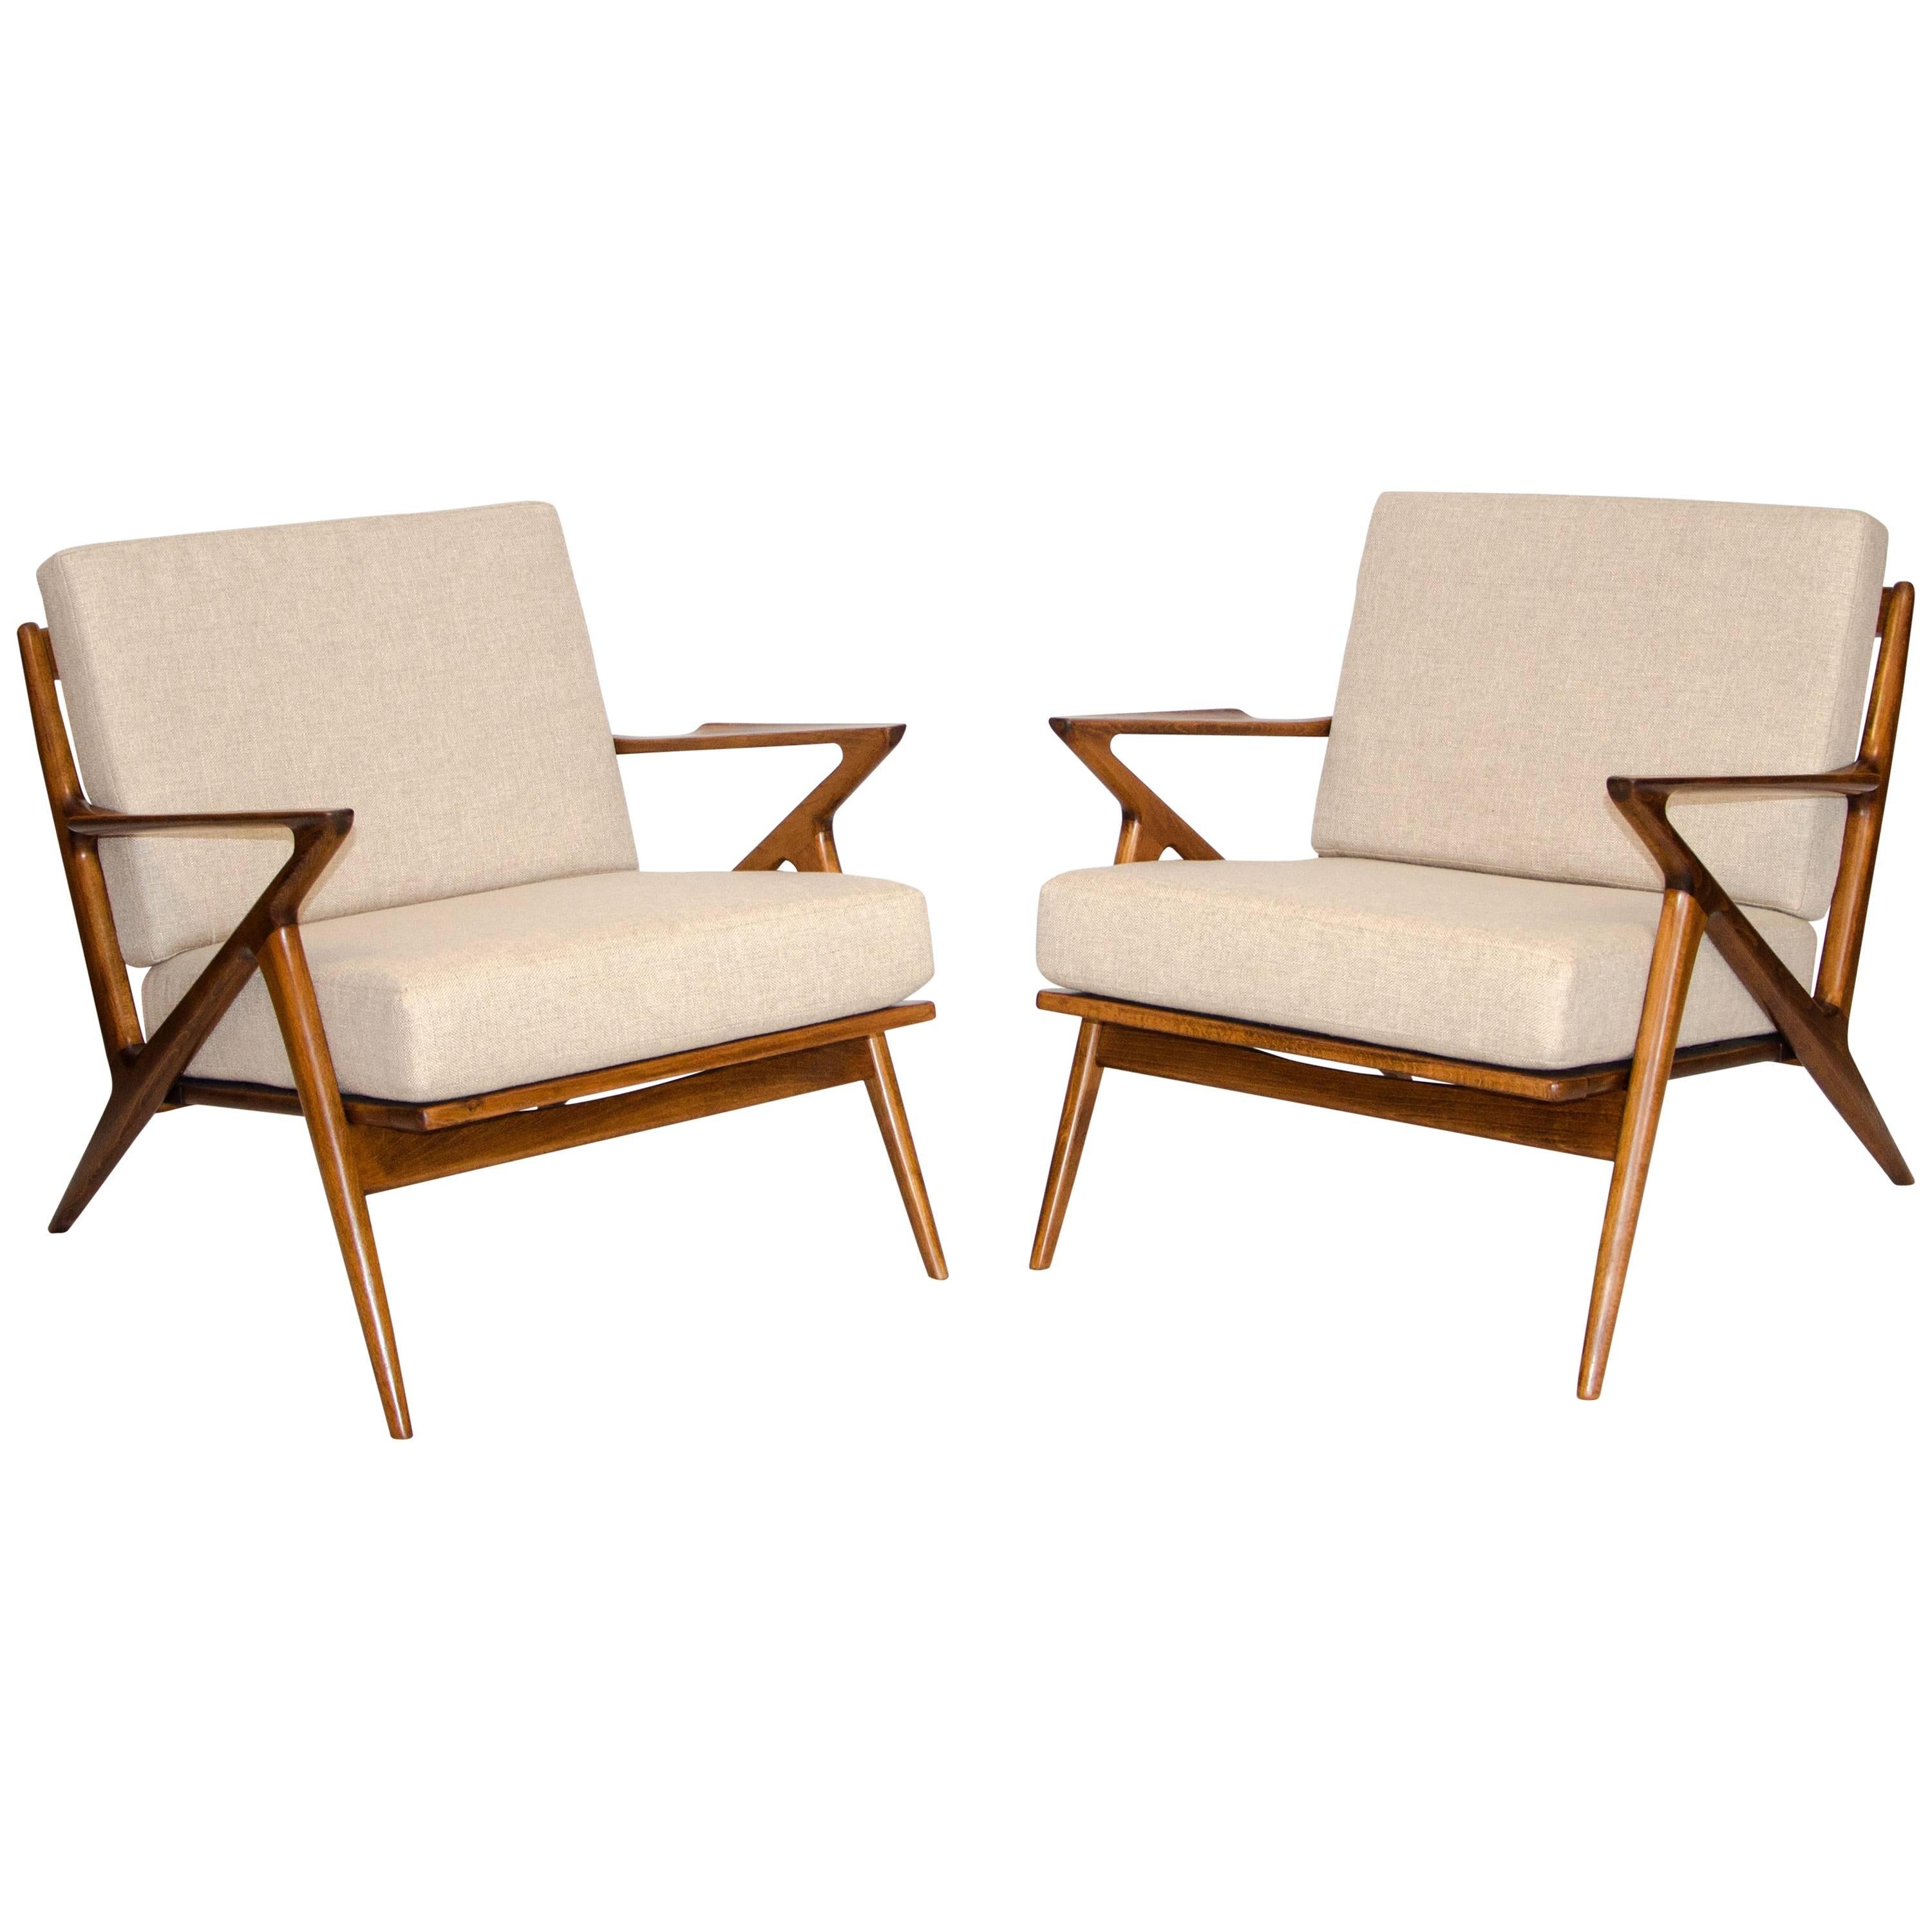 Pair of Danish "Z" Lounge Chairs by Poul Jensen for Selig